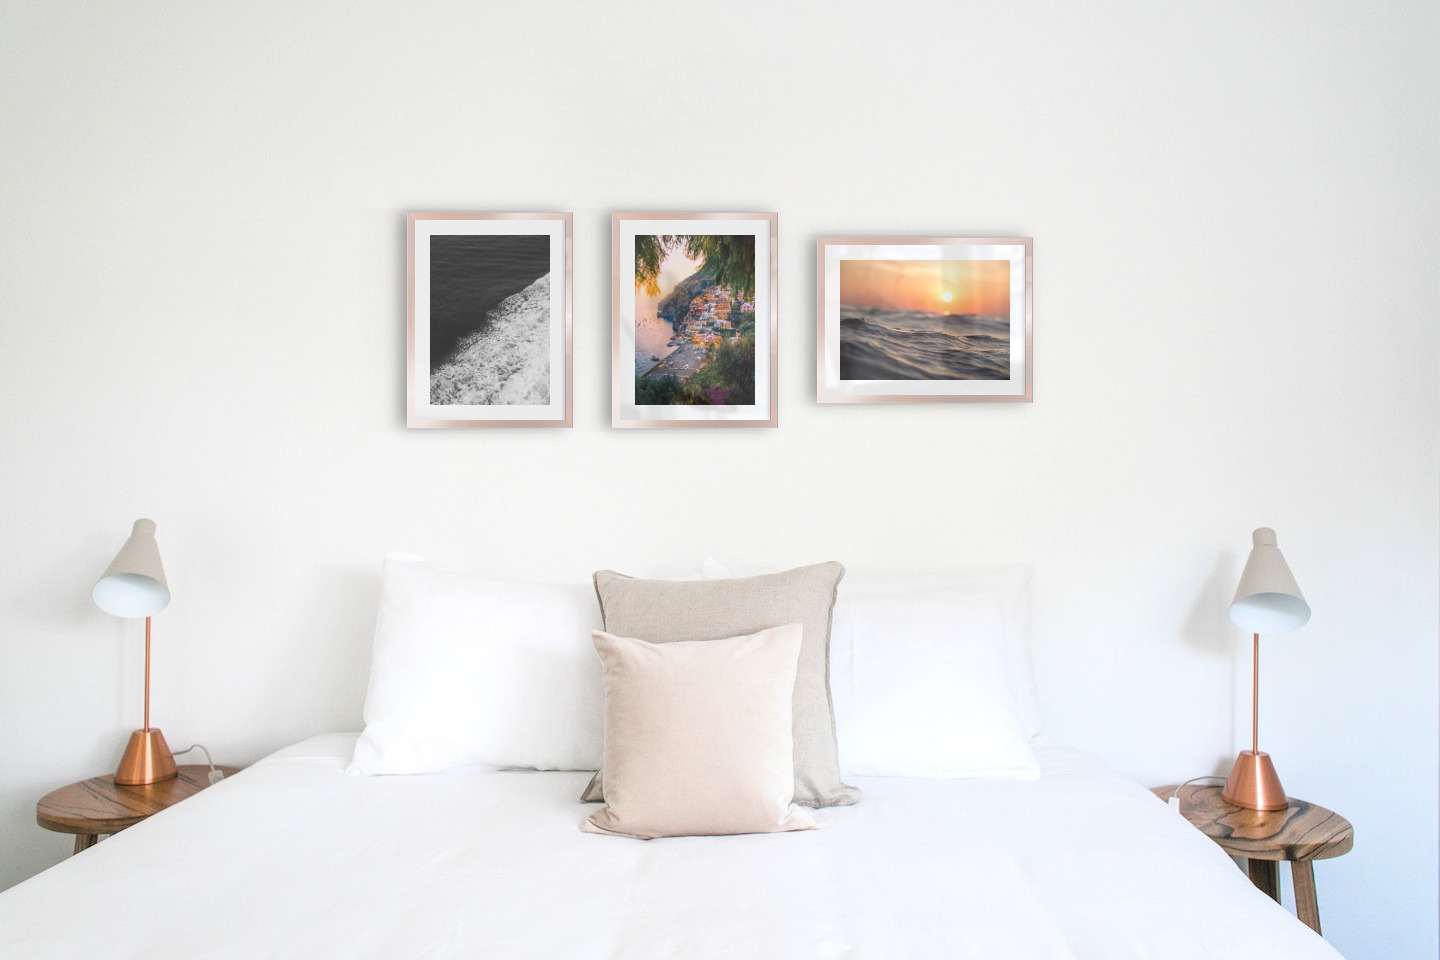 Gallery wall with picture frames in copper in sizes 30x40 with prints "Swell from waves", "City by the sea" and "Waves and the sun"